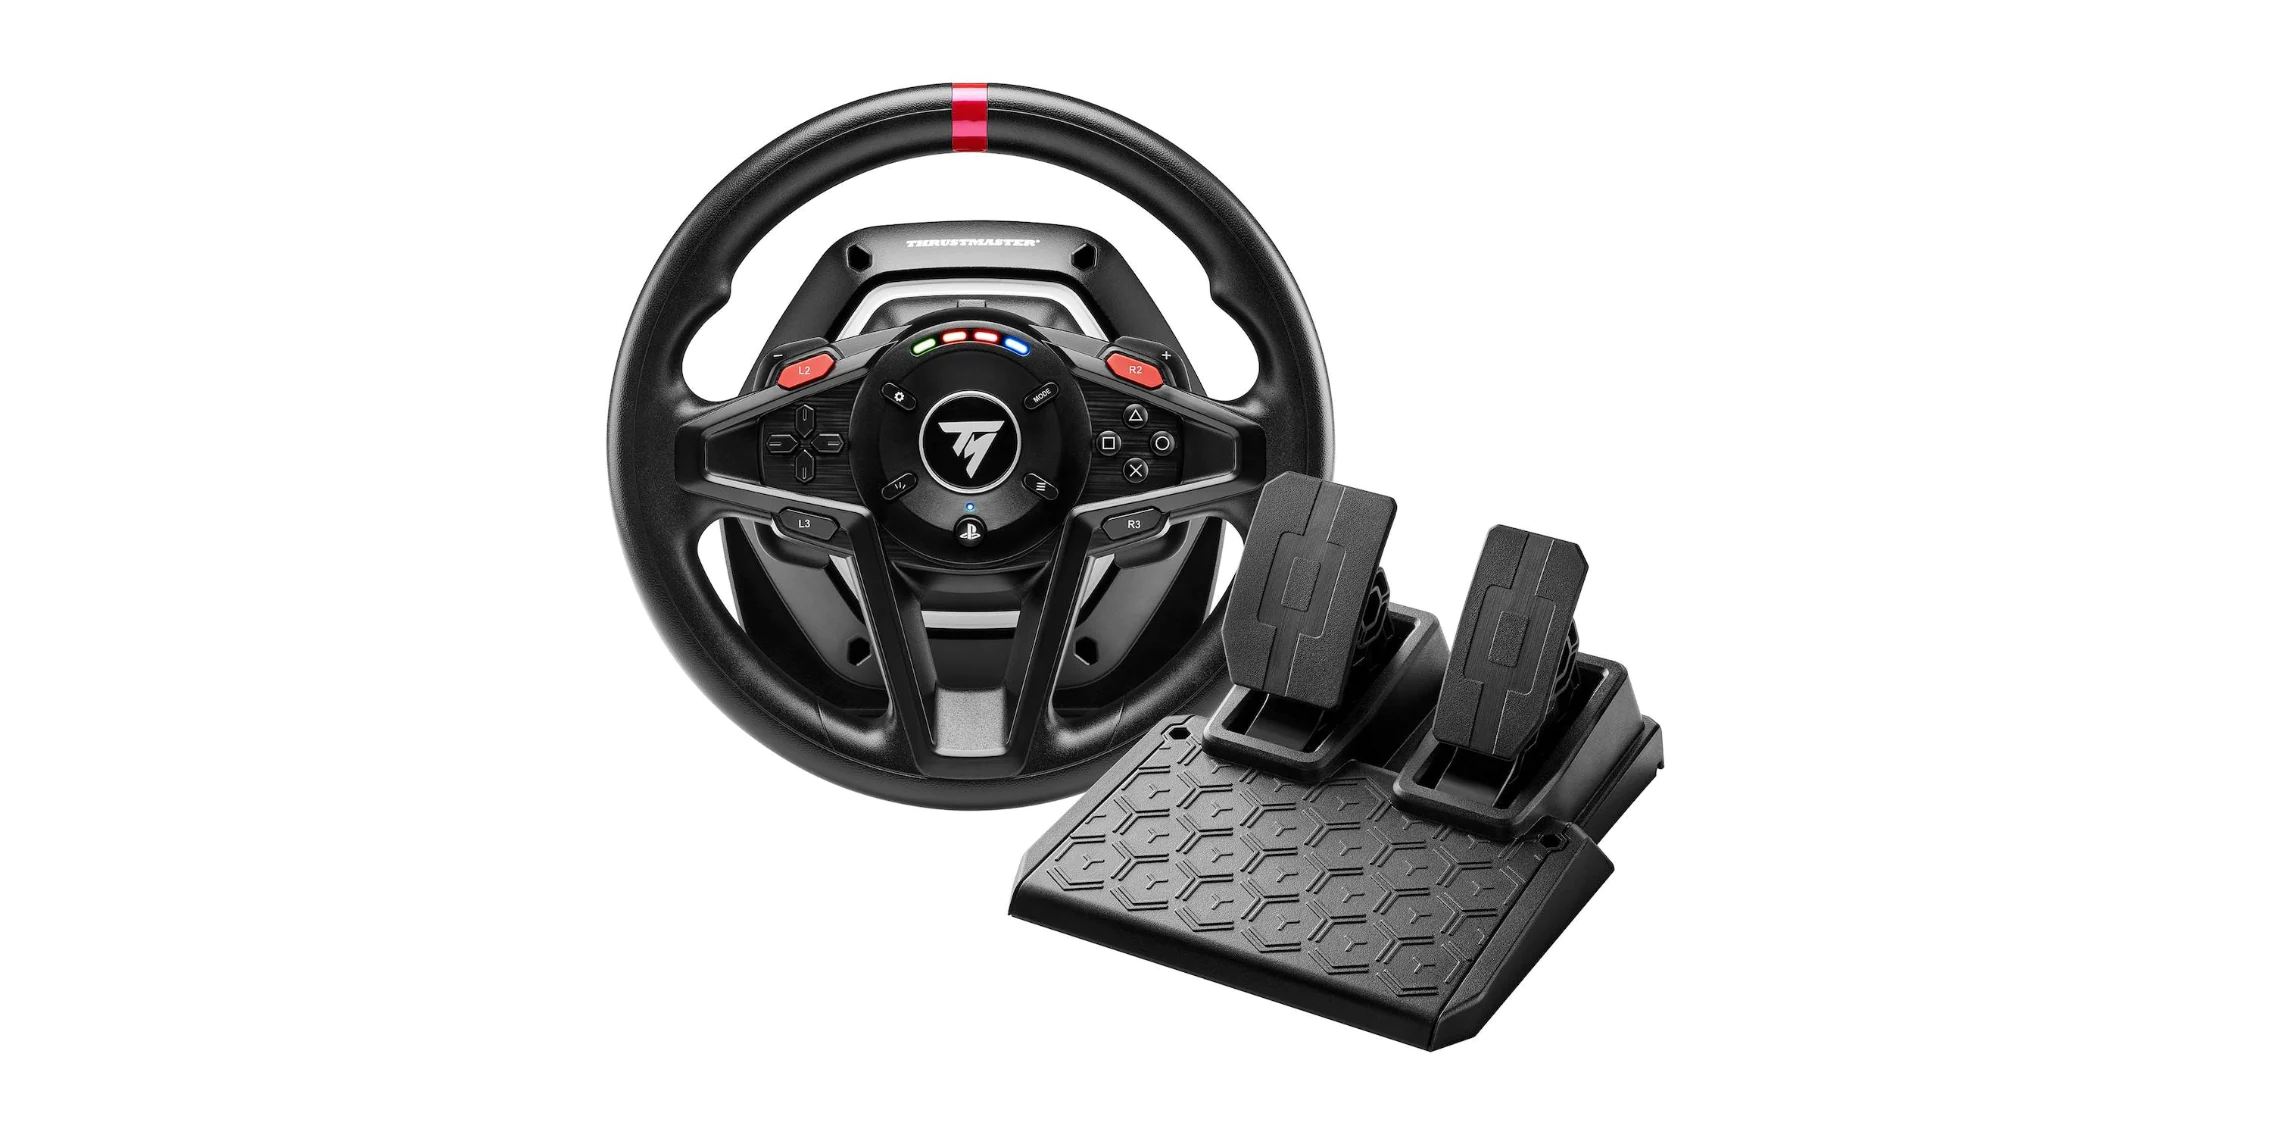 News: Thrustmaster T128 - A preview 